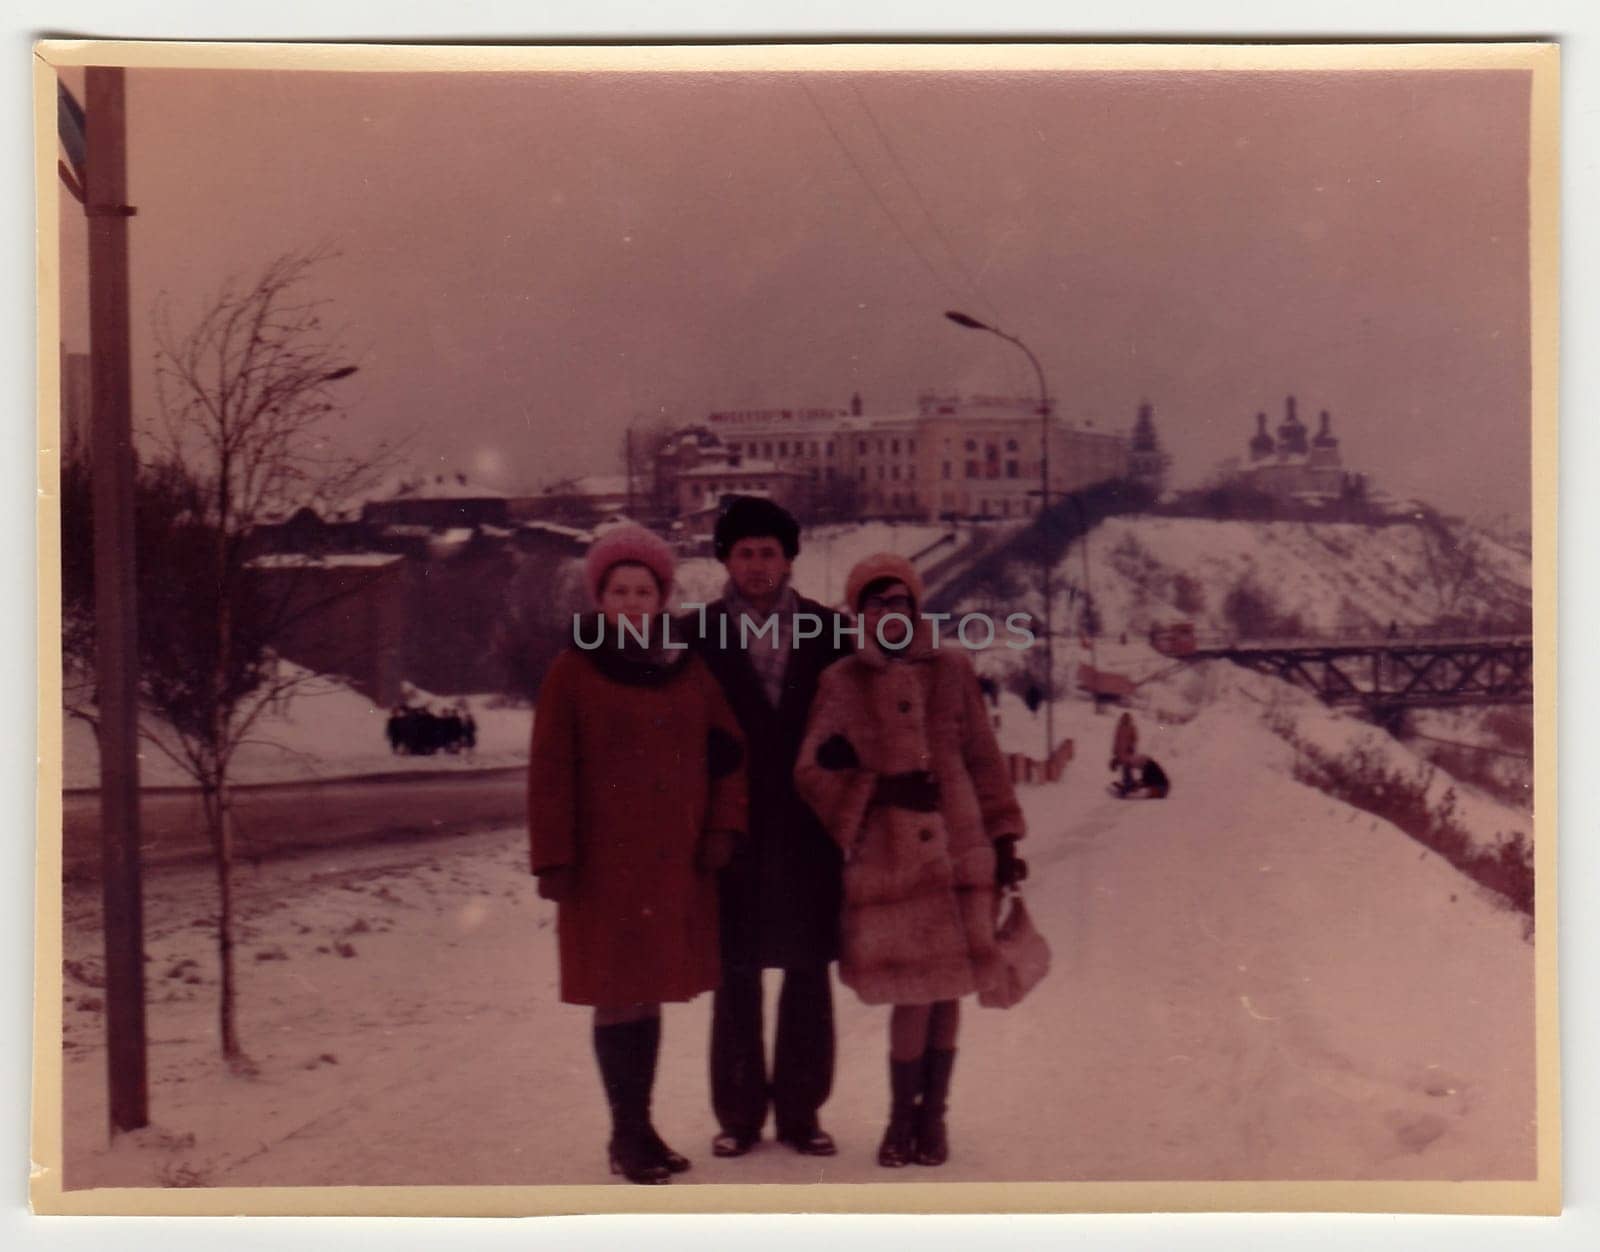 USSR - CIRCA 1980s: Vintage photo shows people pose on street in winter.